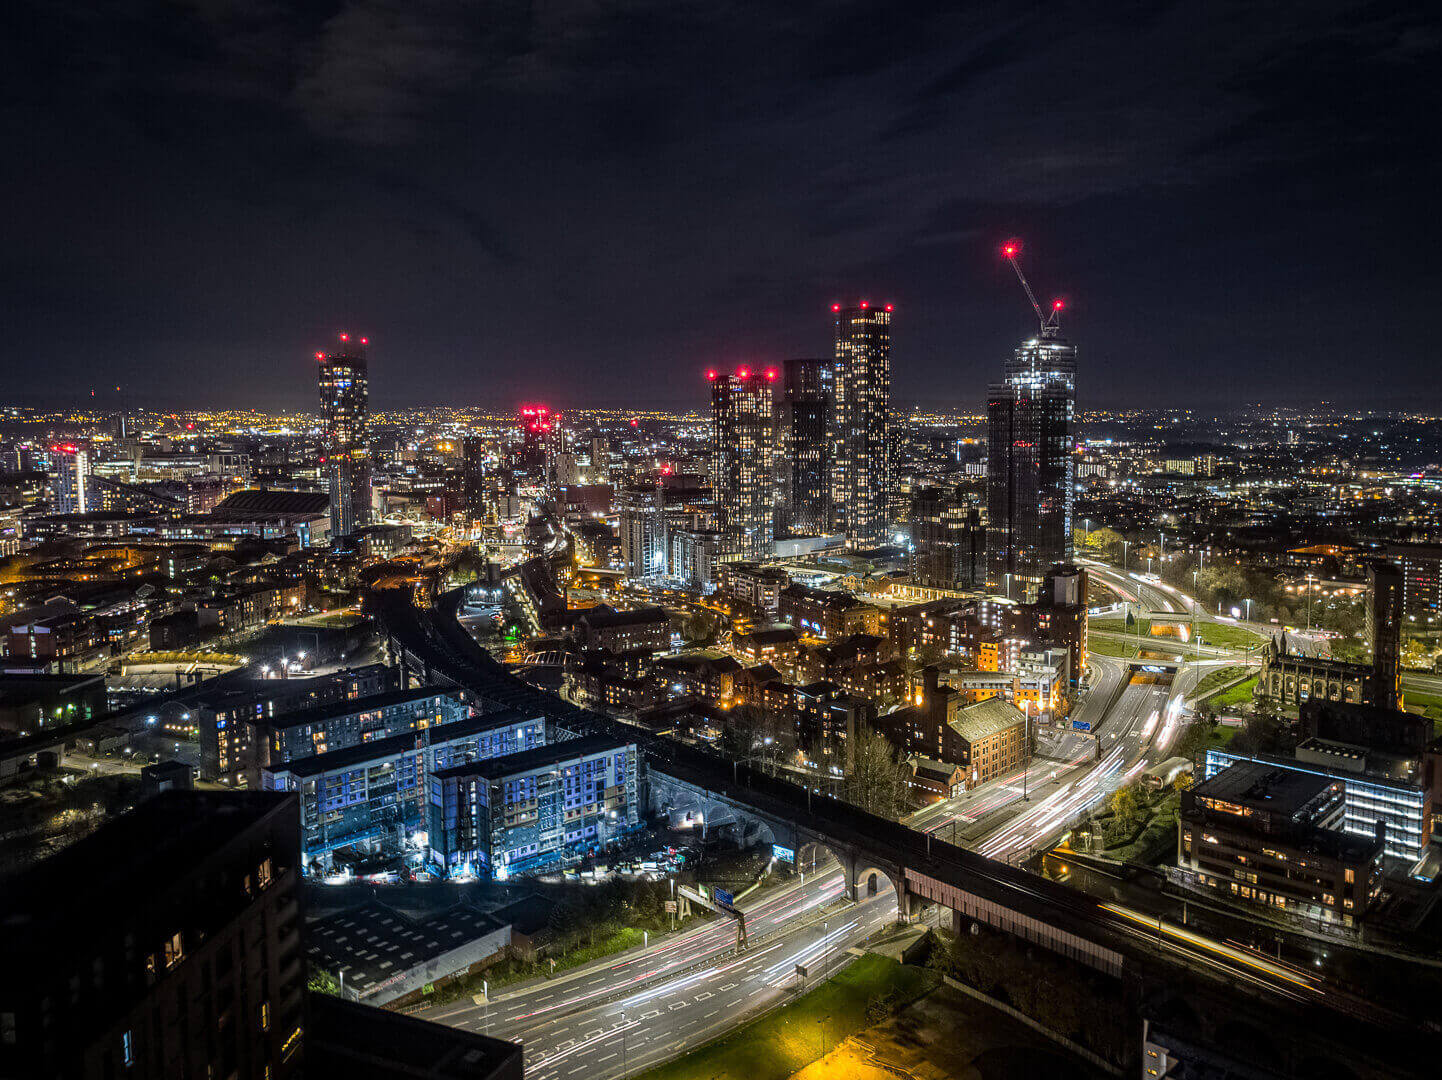 Night time aerial drone photography of Renaker developments in Manchester